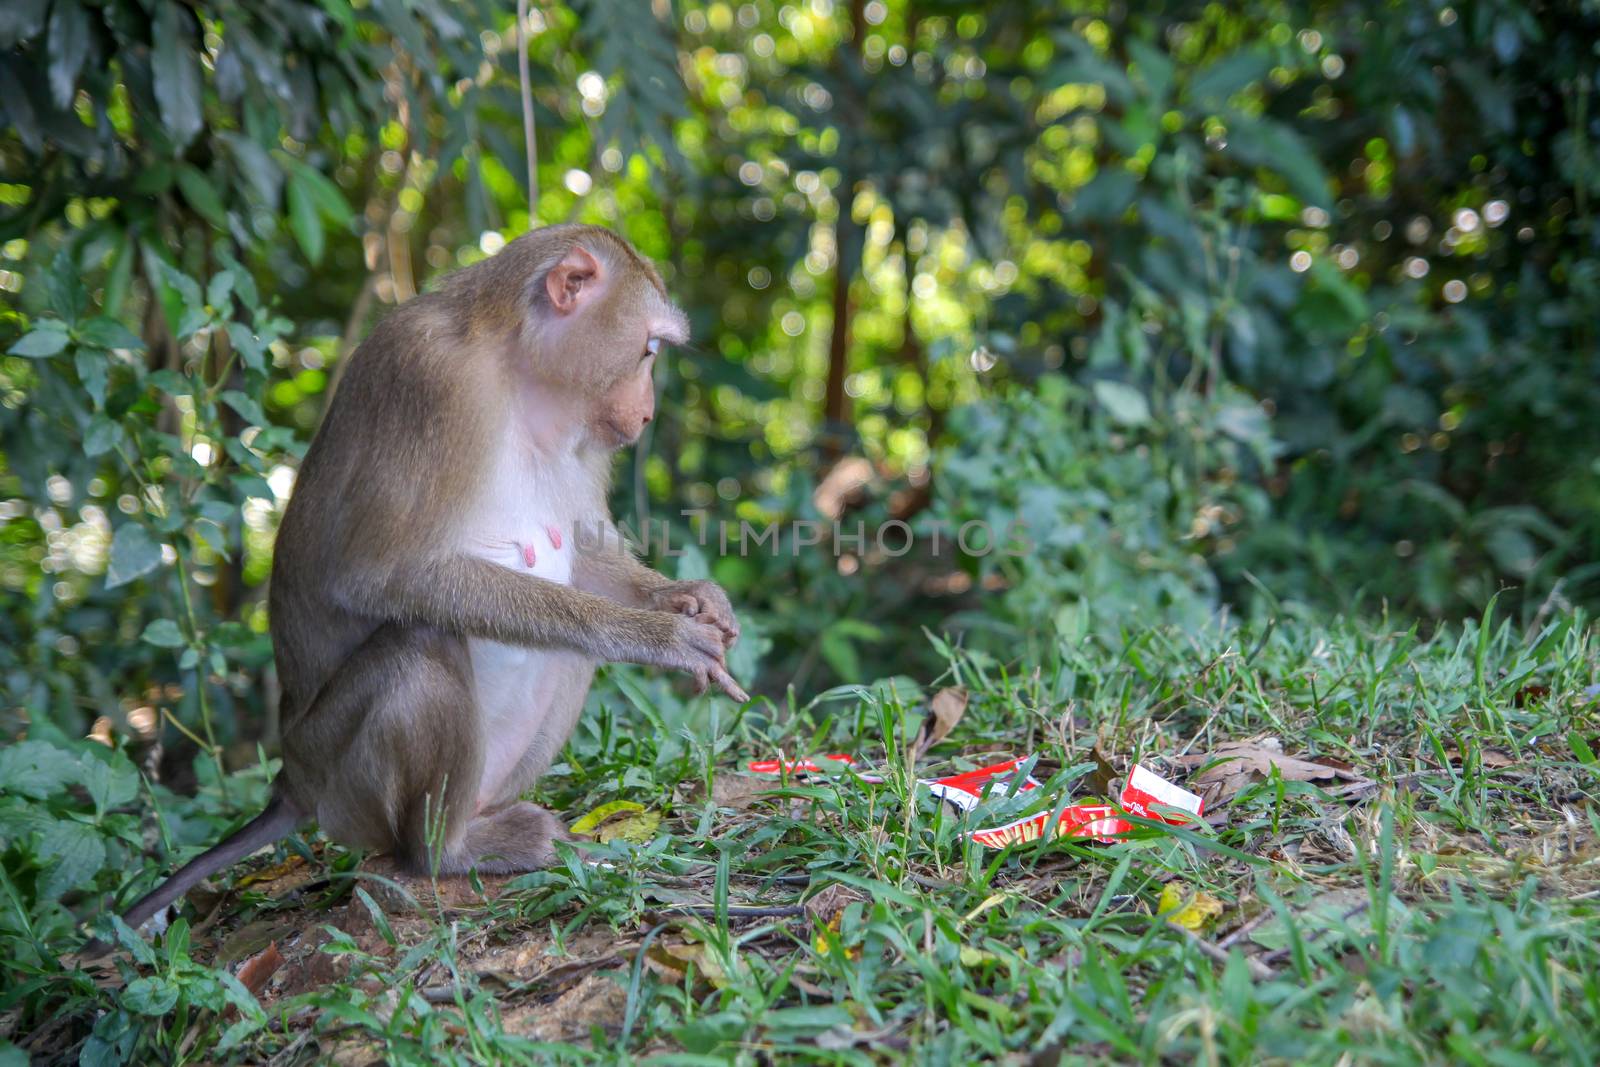 Monkey sitdown and look Garbage in side forest by pumppump